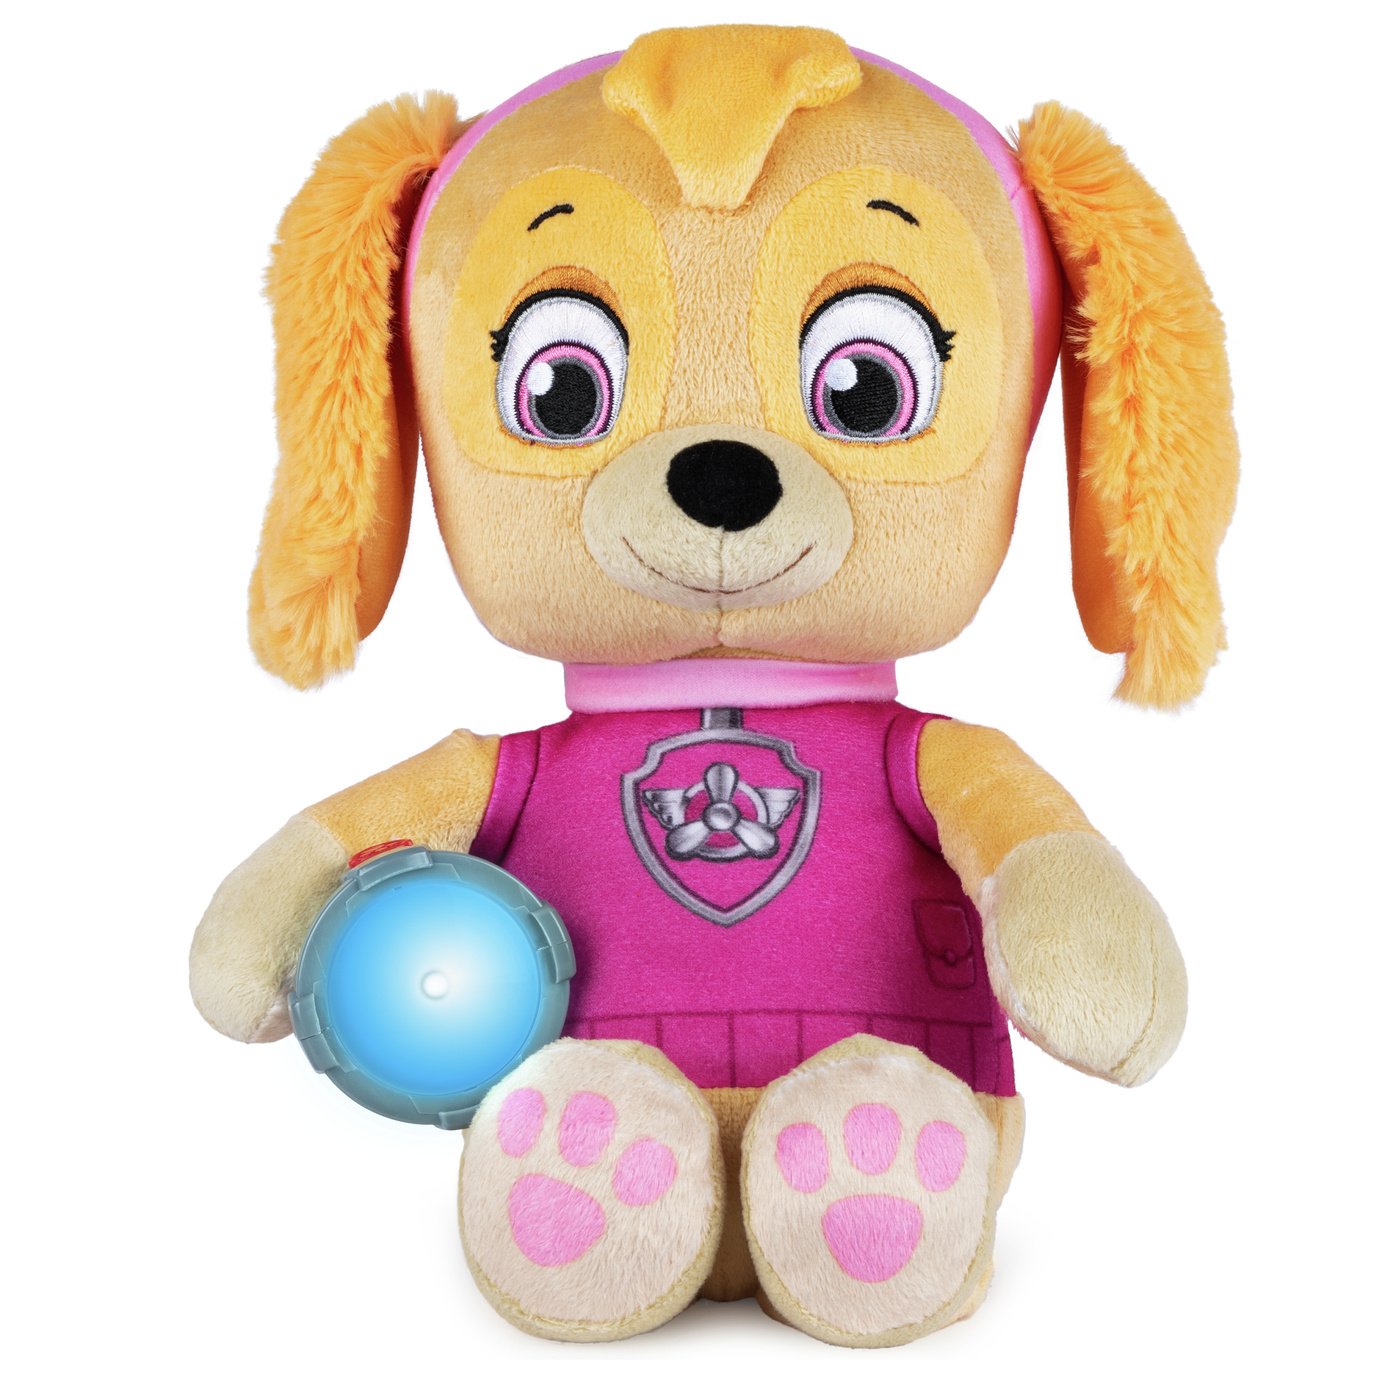 PAW Patrol Snuggle Up Marshall Soft Toy Help Light The Way For Nighttime Rescues